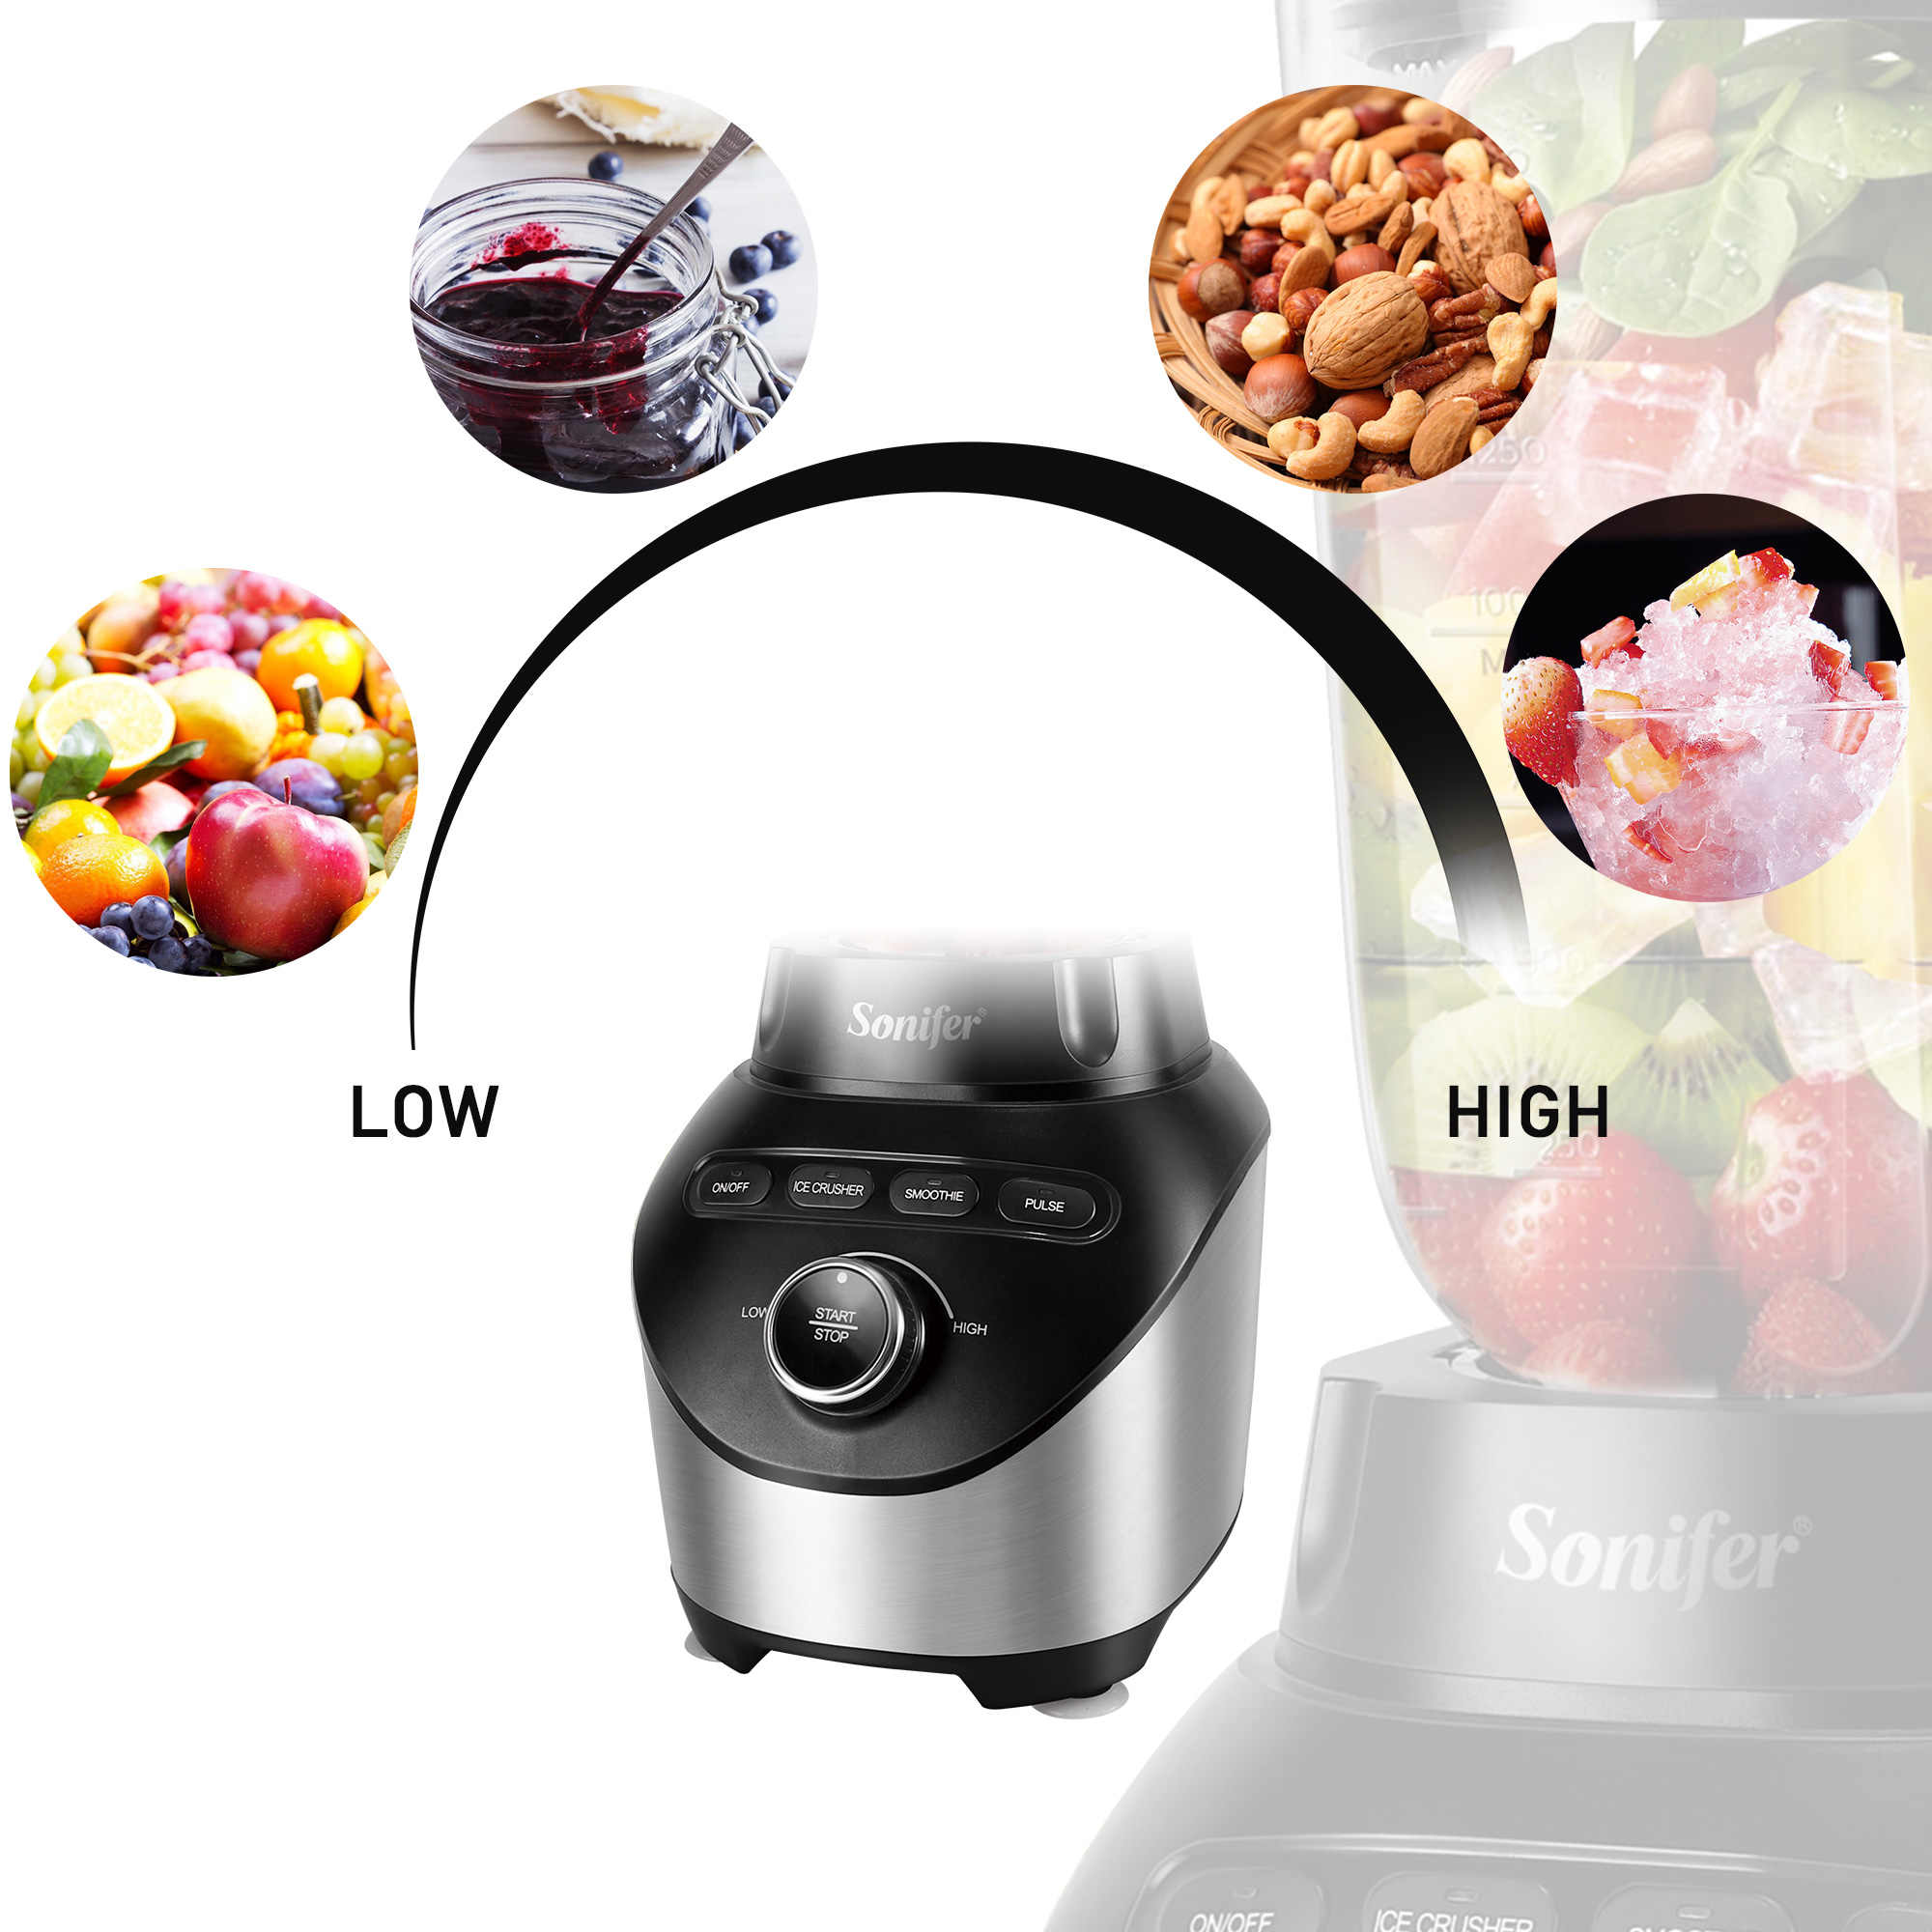 Sonifer 1000W Professional Blender with Ice Crush Function SF-8053